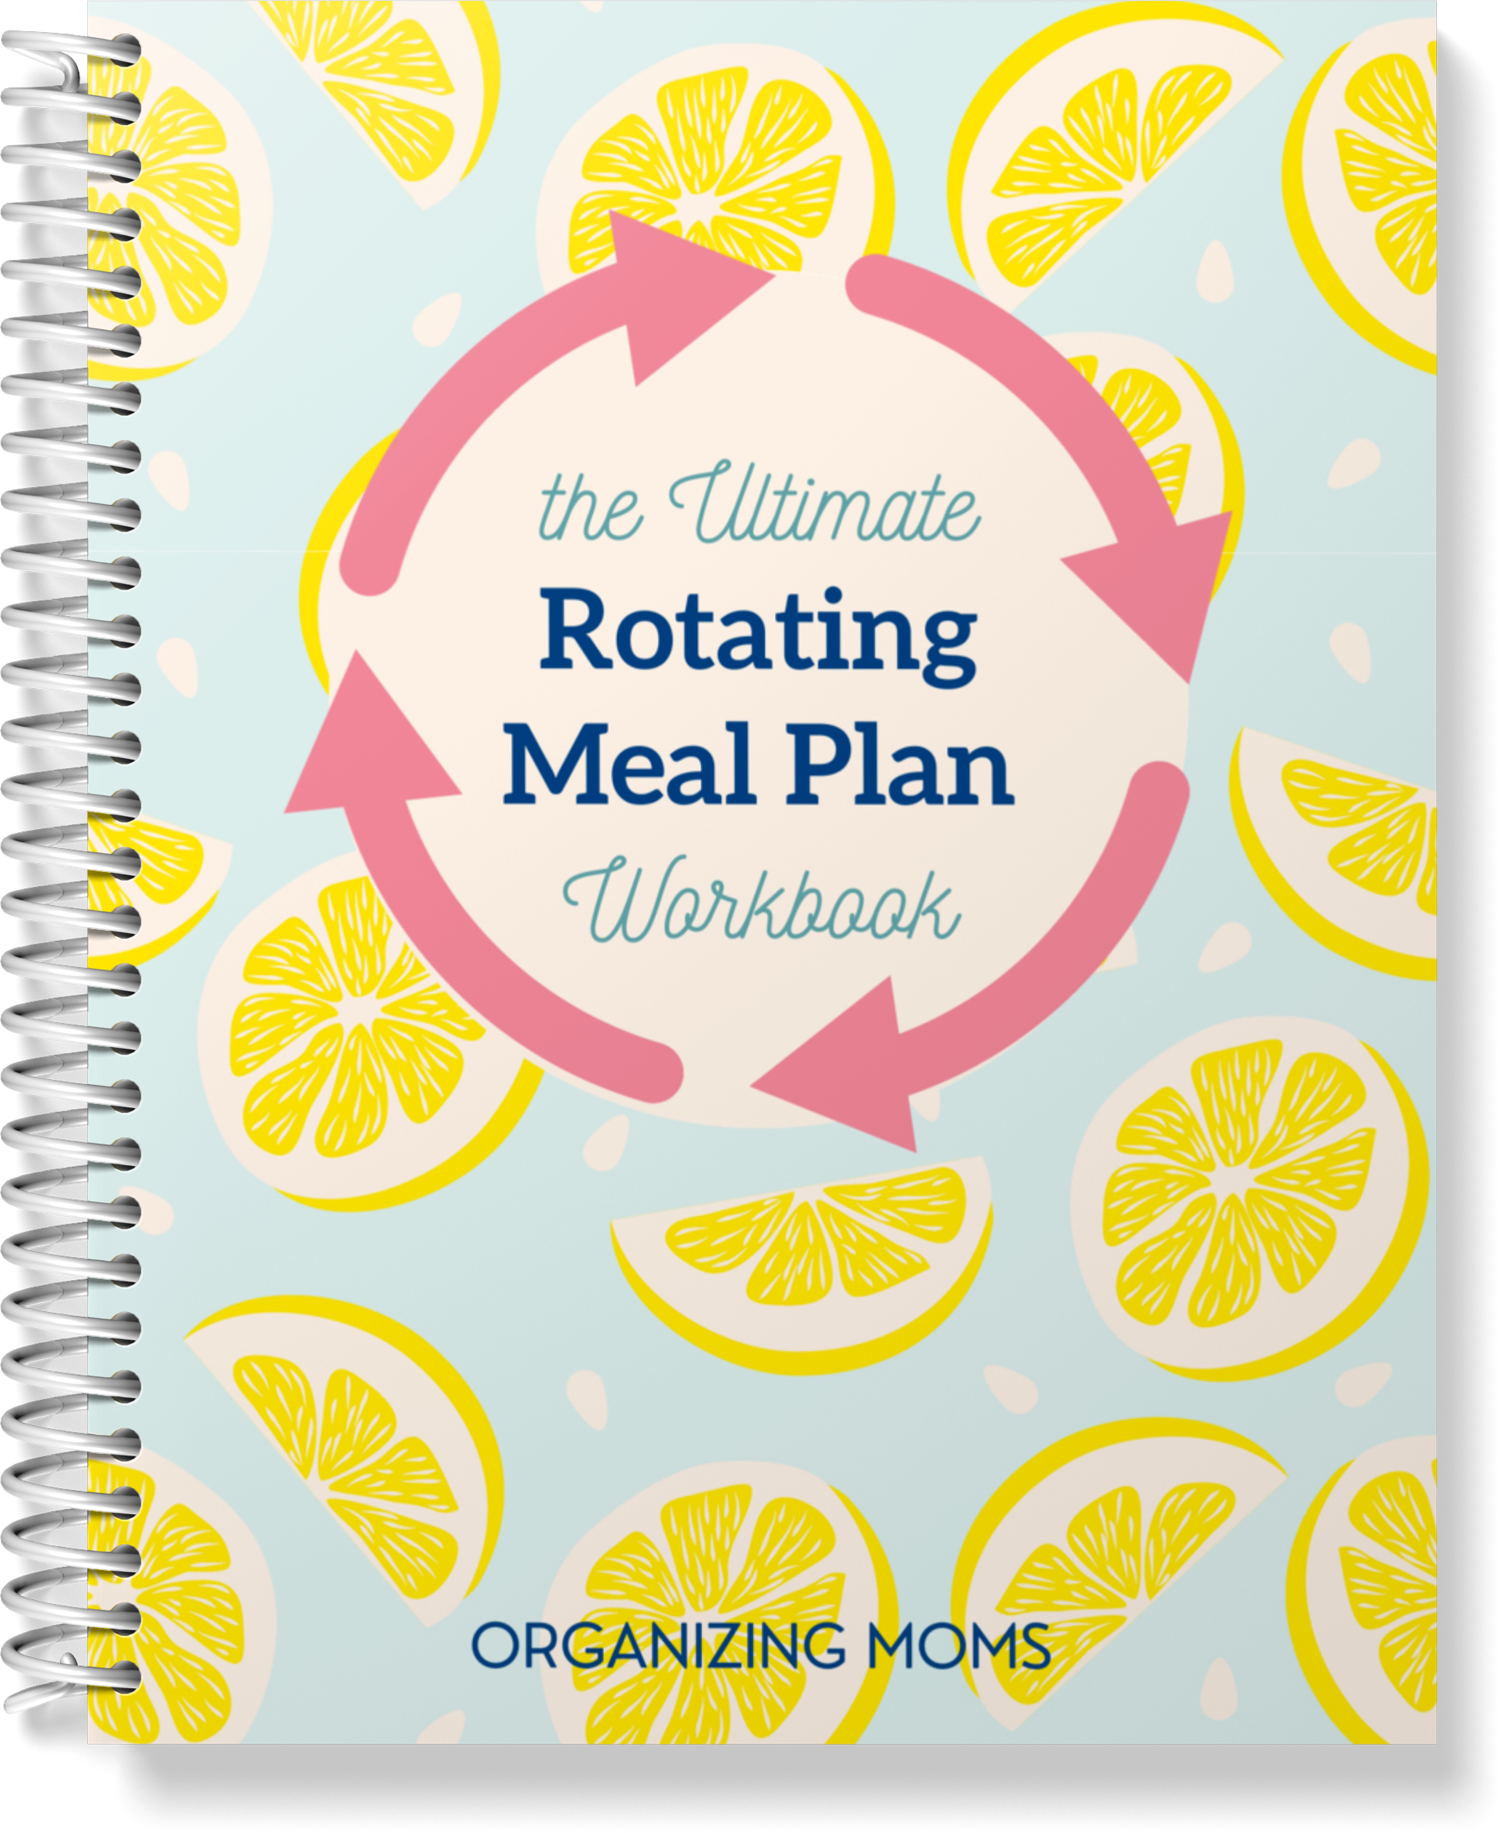 Image of The Ultimate Rotating Meal Plan Workbook cover on spiral notebook